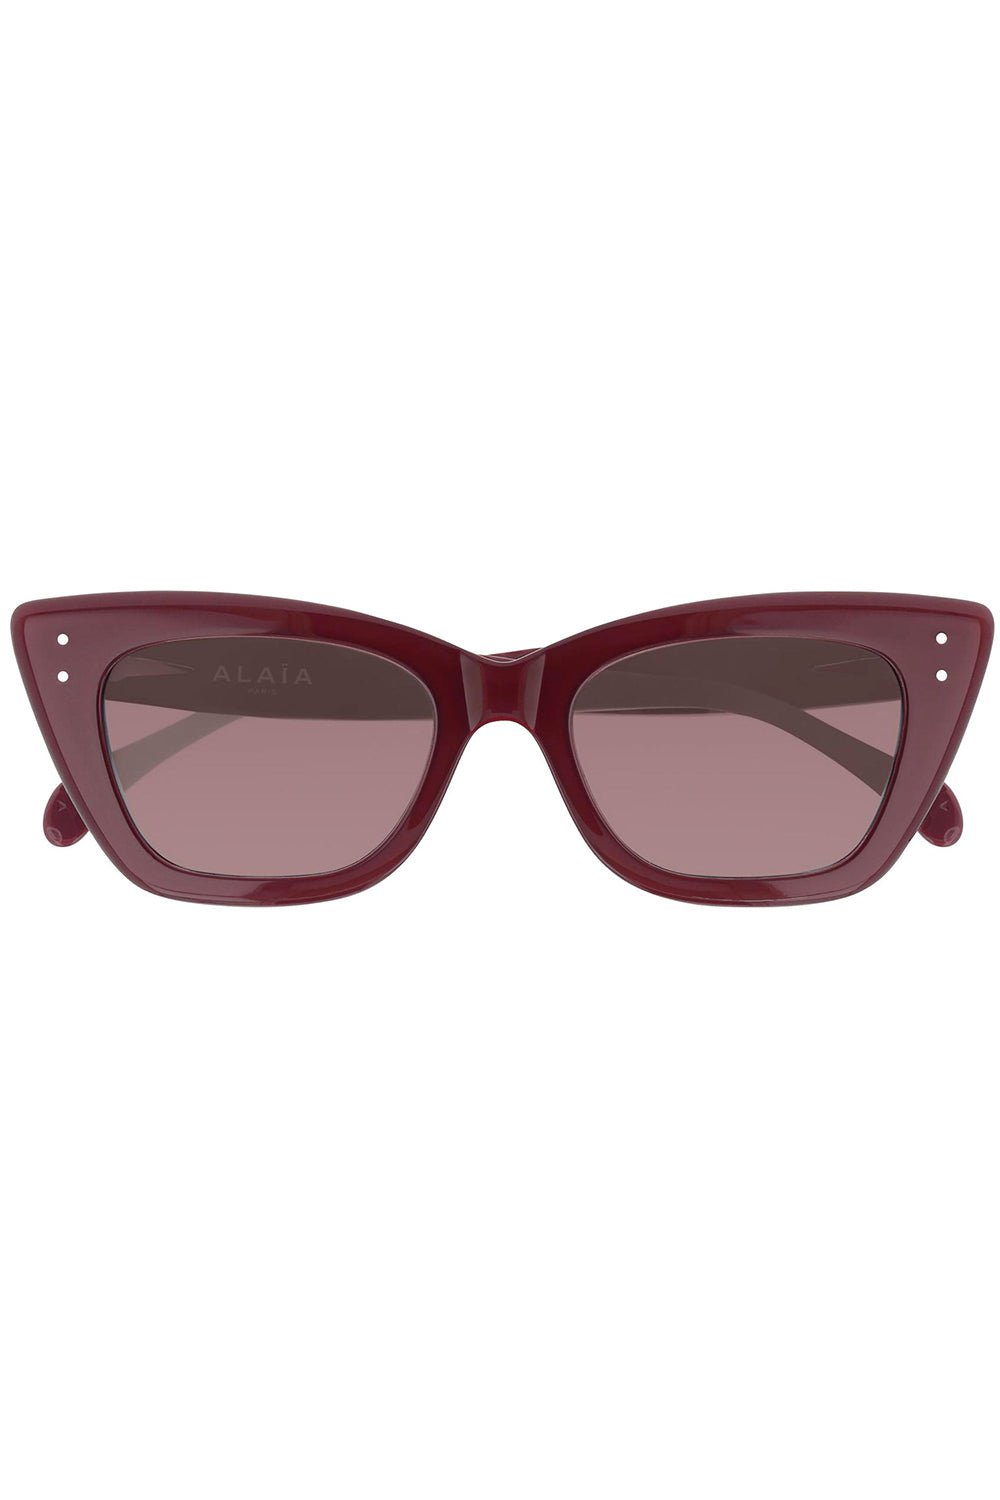 ALAÏA-Rounded Cateye Sunglasses-RED